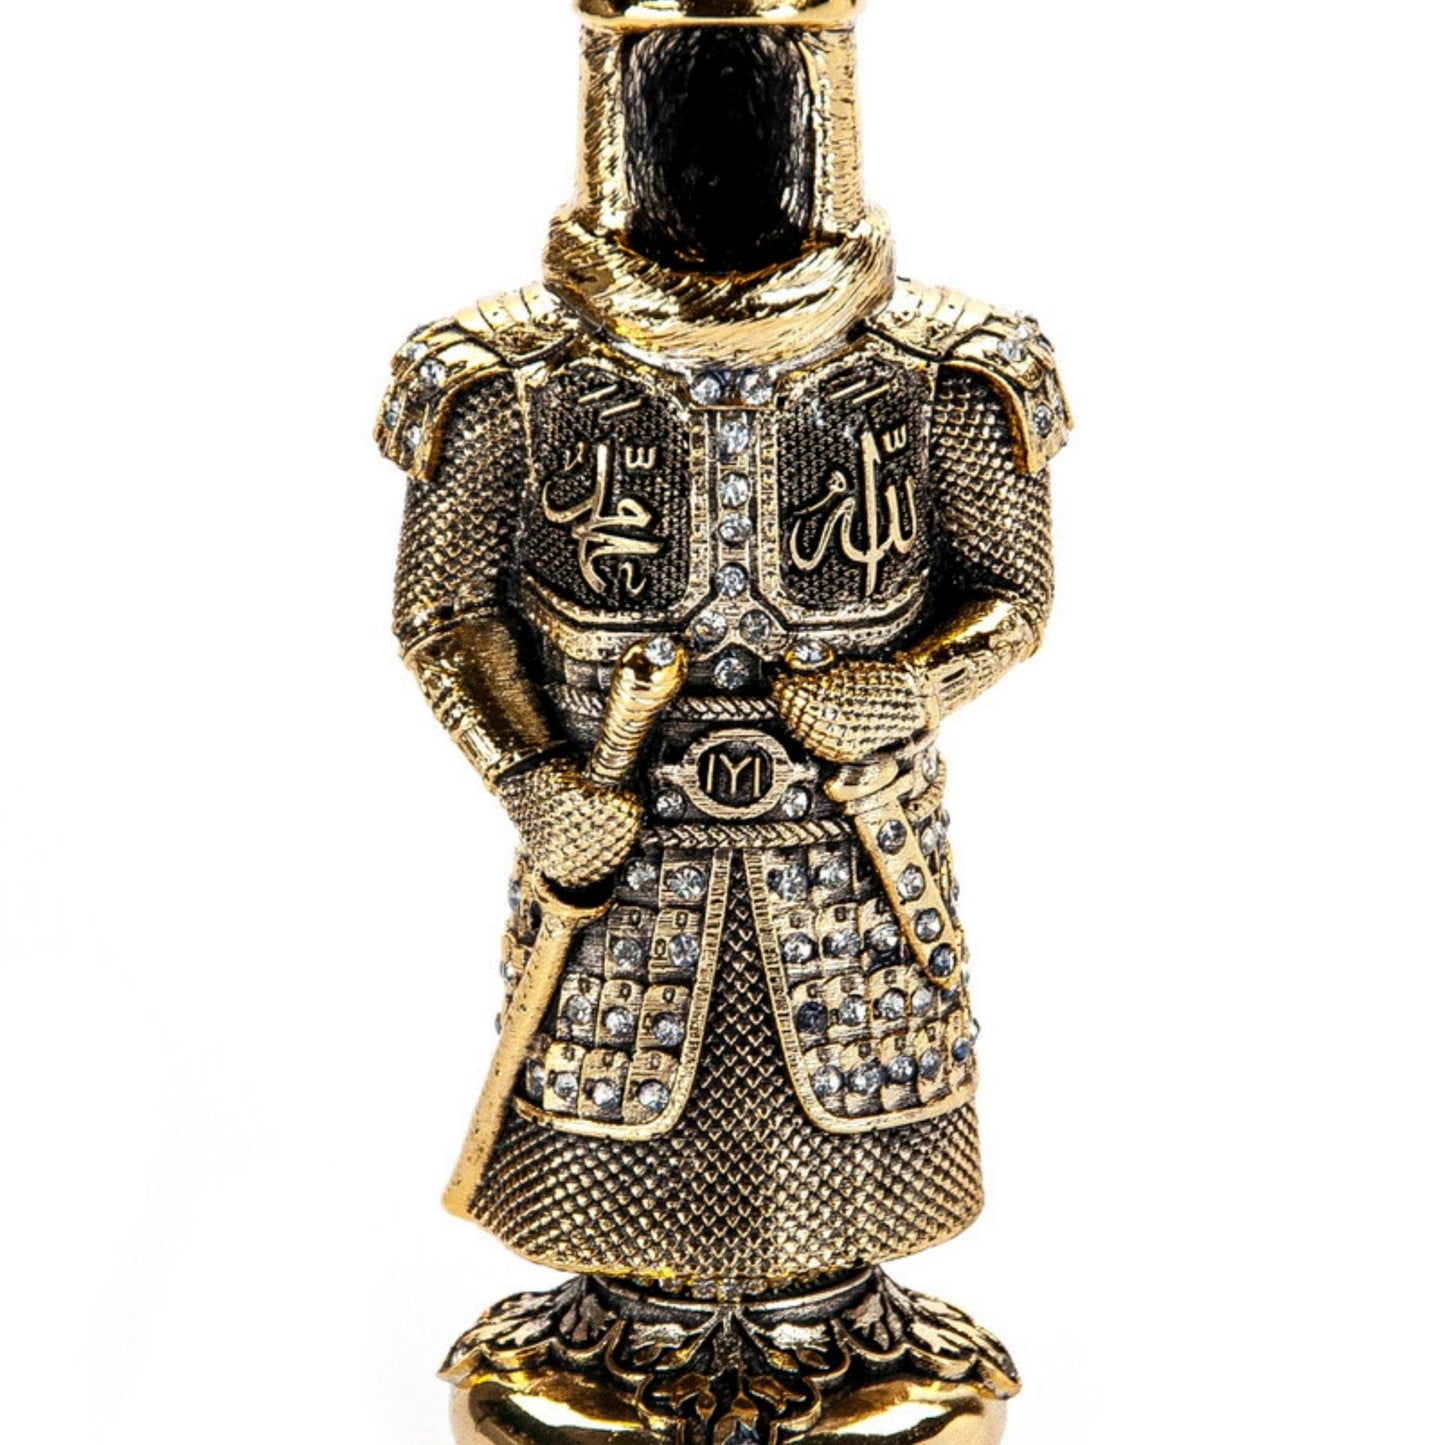 Handmade Ertugrul Ghazi Armor Statue Gift Silver Color/Zinc and Copper Alloy Handcrafted Metal Statue/220mm Heavy Material 700gr Dirilis Toy - Turkish TV Series